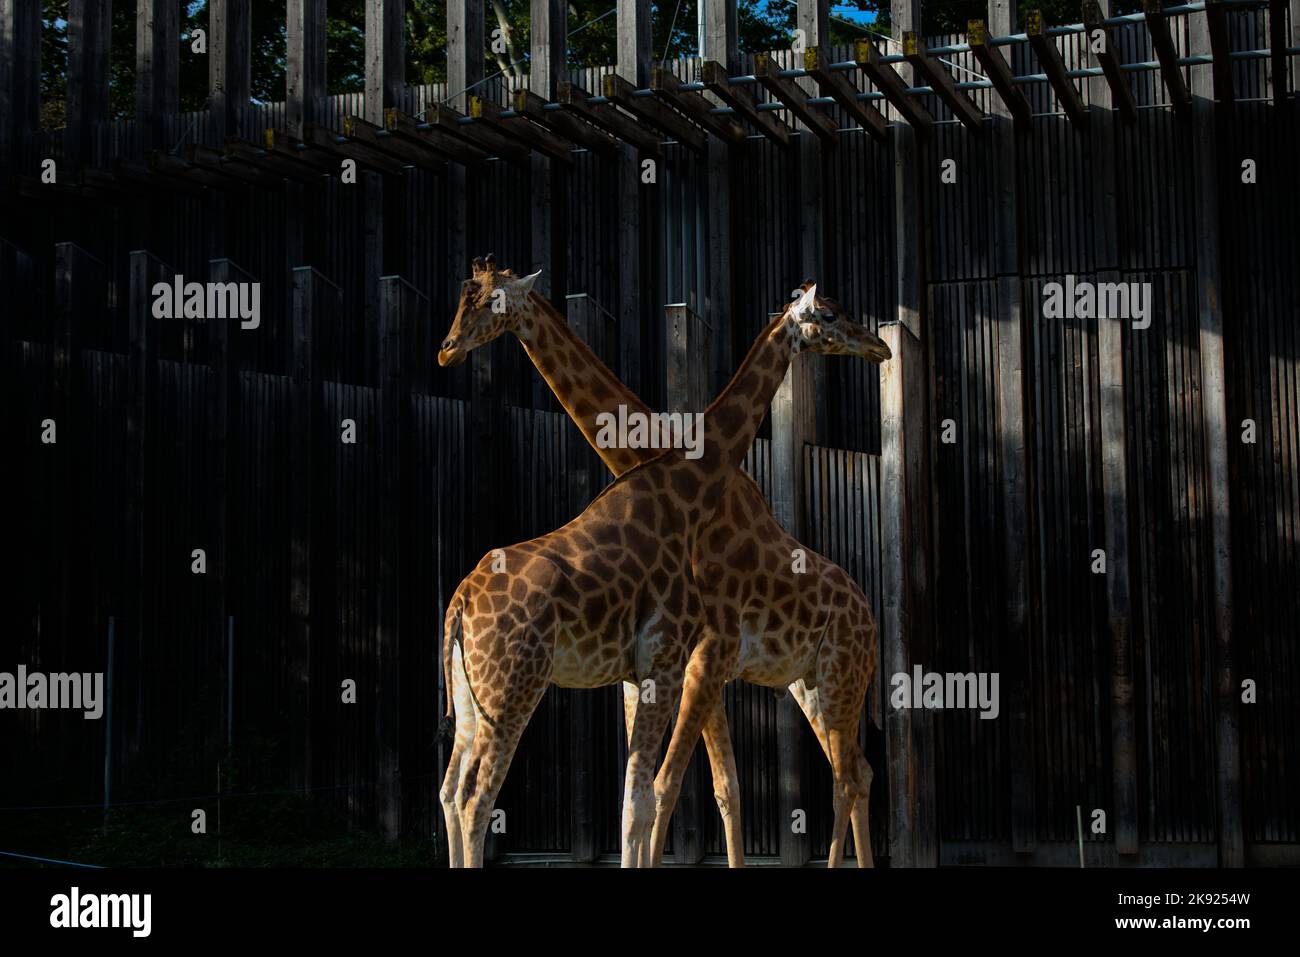 Two Giraffes crossing each other Stock Photo